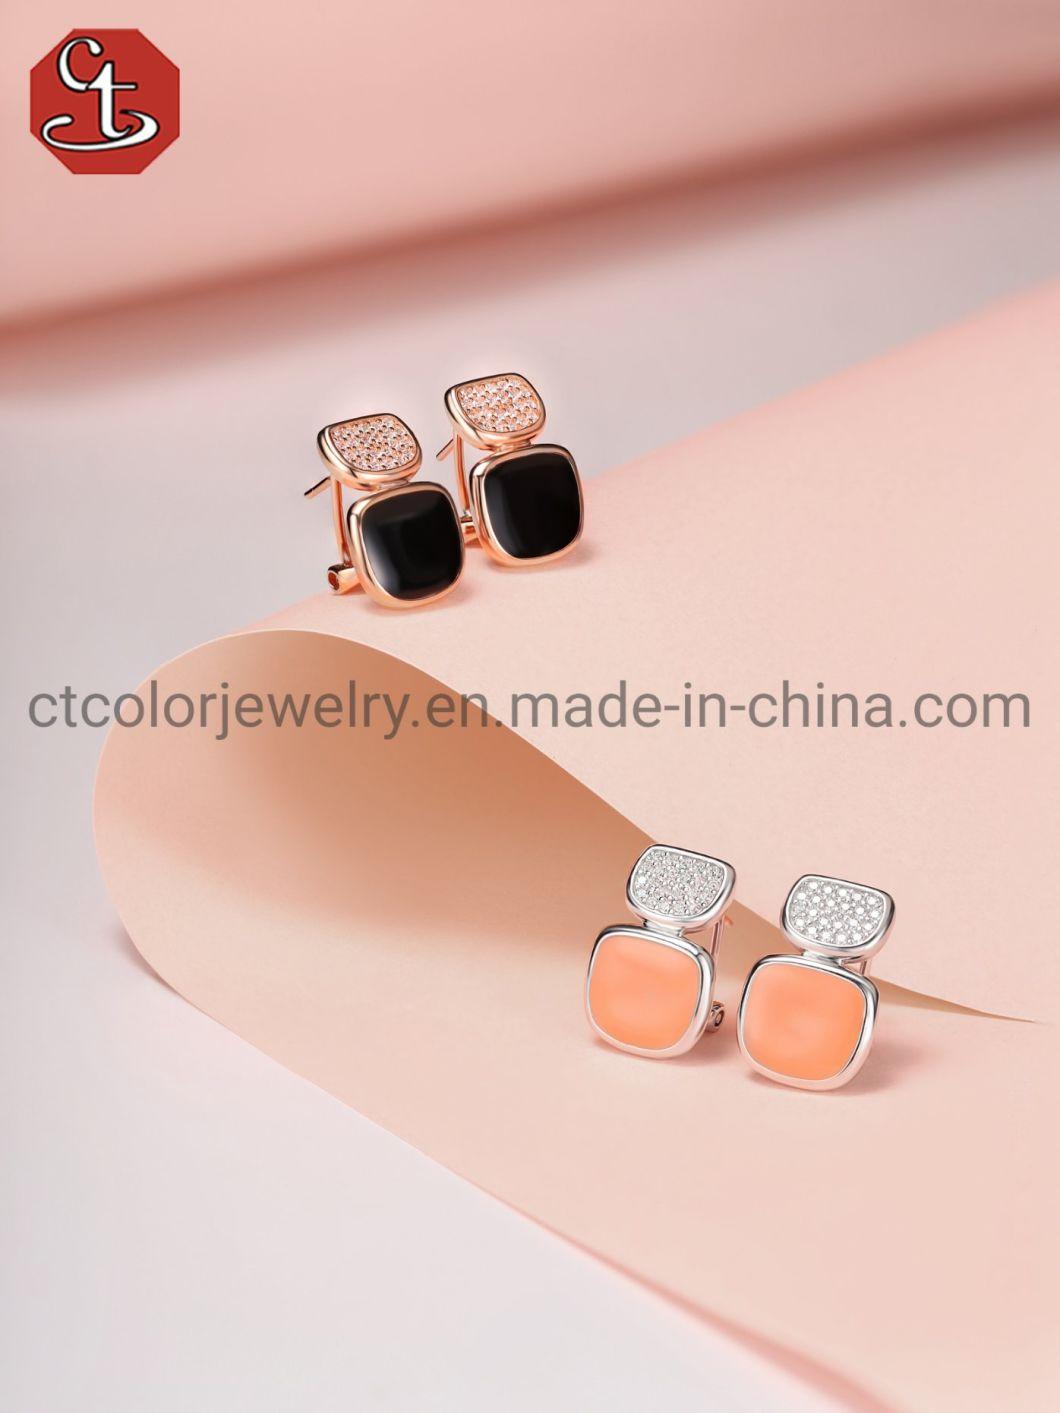 CT COLOR Fashion Jewelry Rose Gold Plated 925 Sterling Silver Earrings Enamel and CZ omega Earring for Women